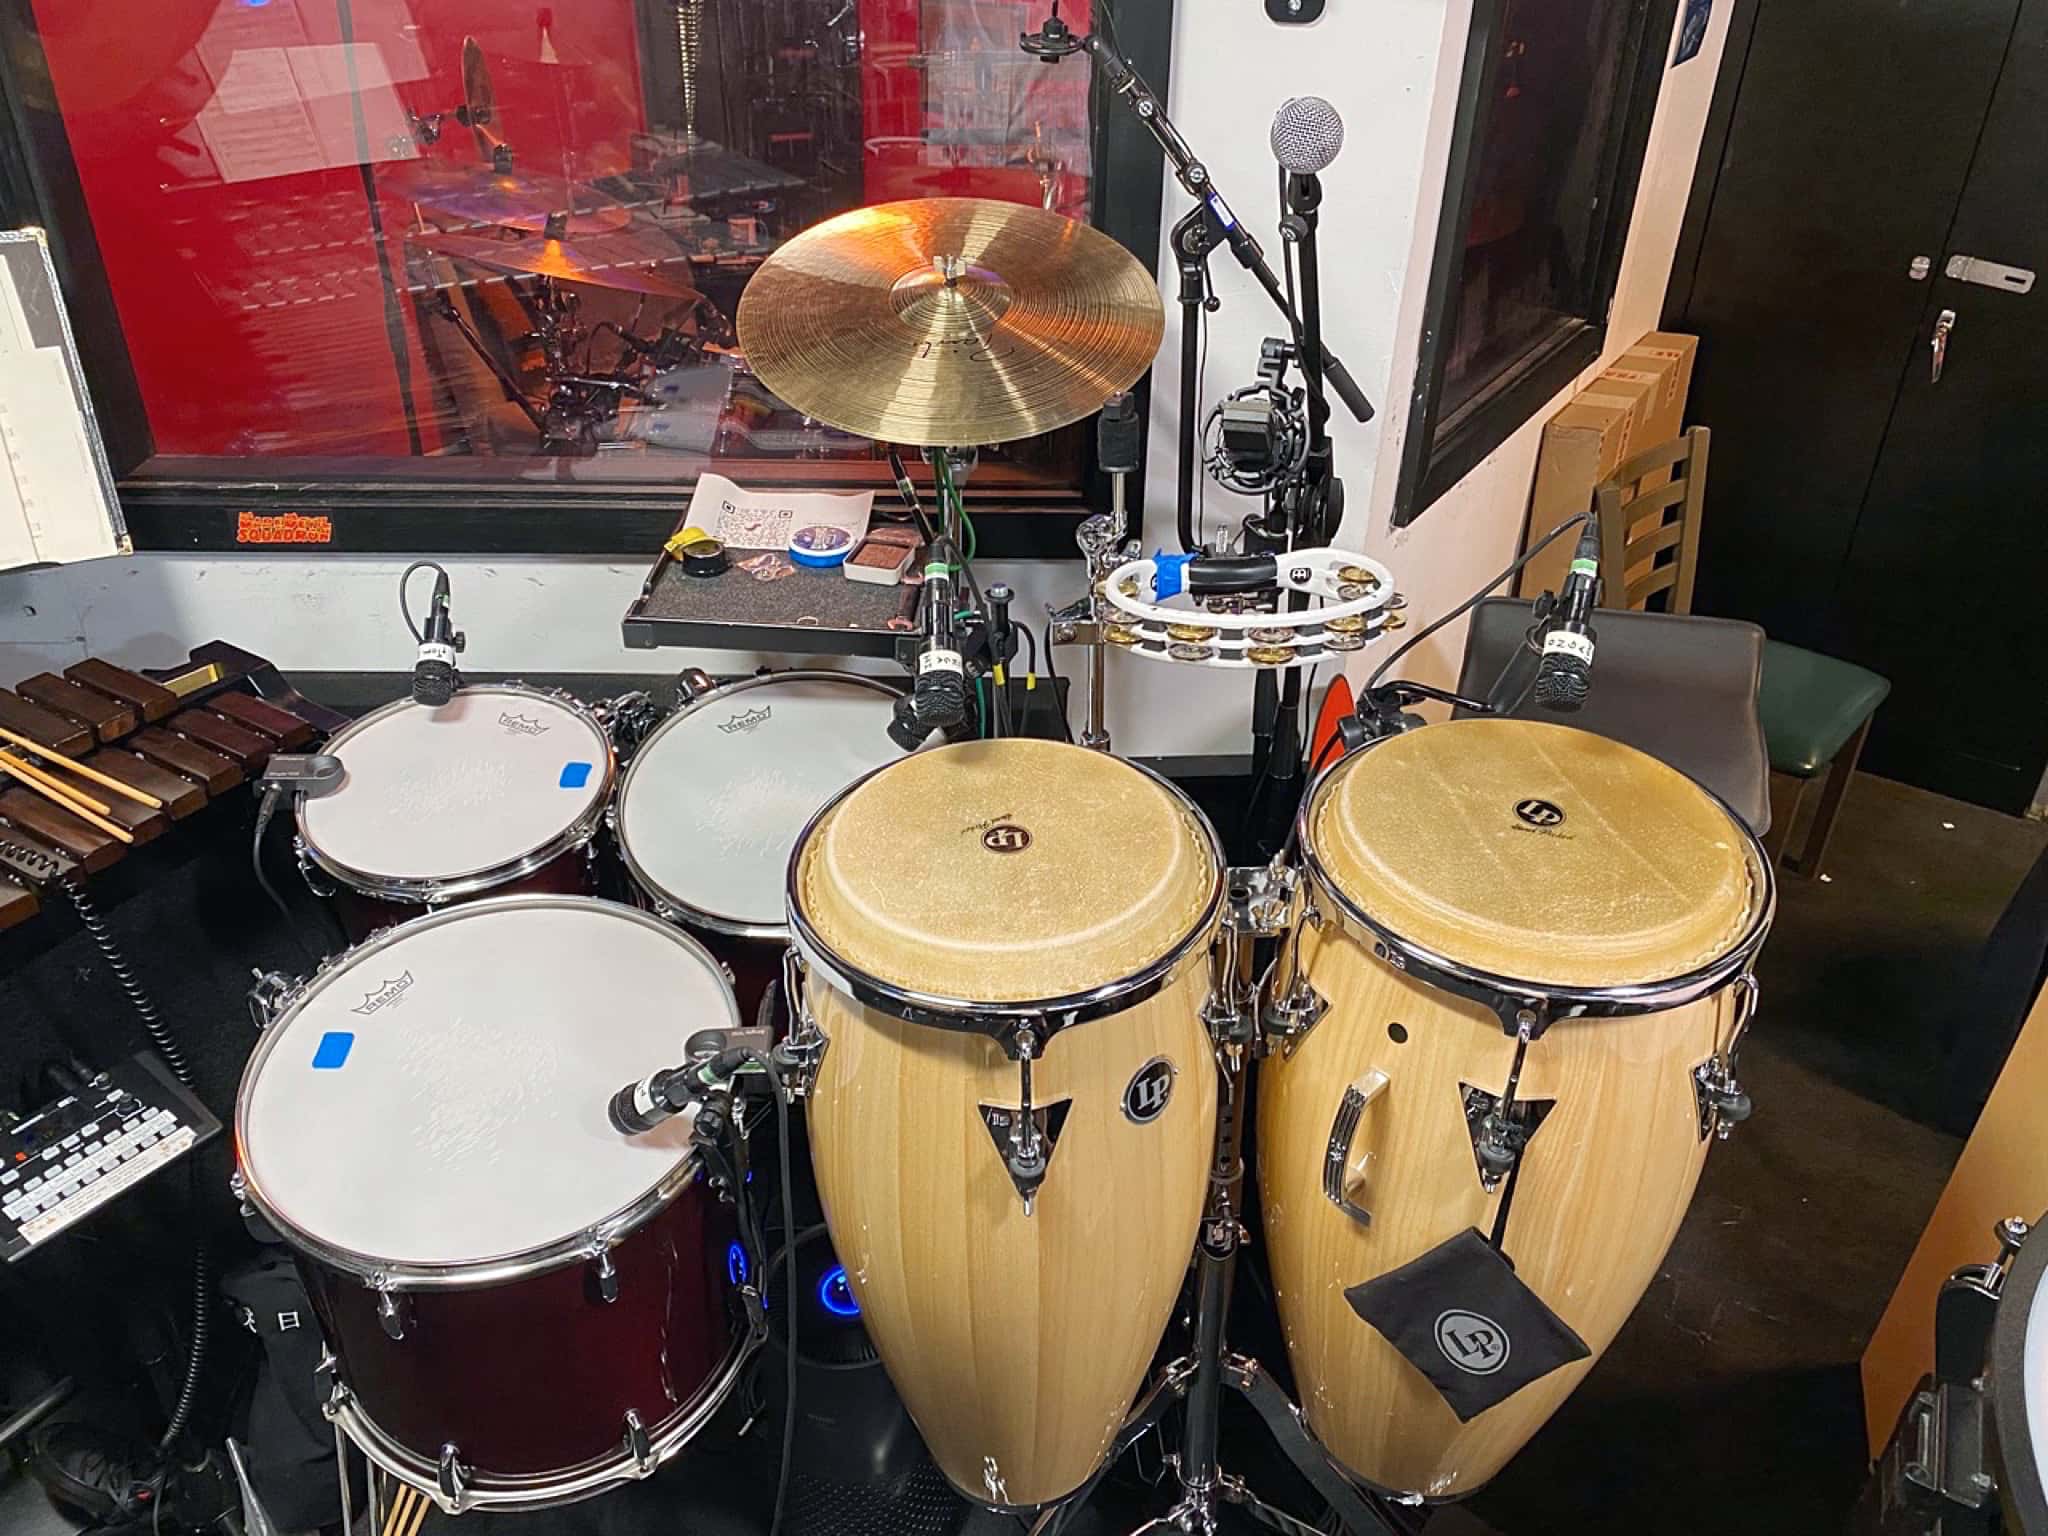 Dave Roth's percussion setup for the Broadway production of Back to the Future at the Winter Garden Theater in New York City.